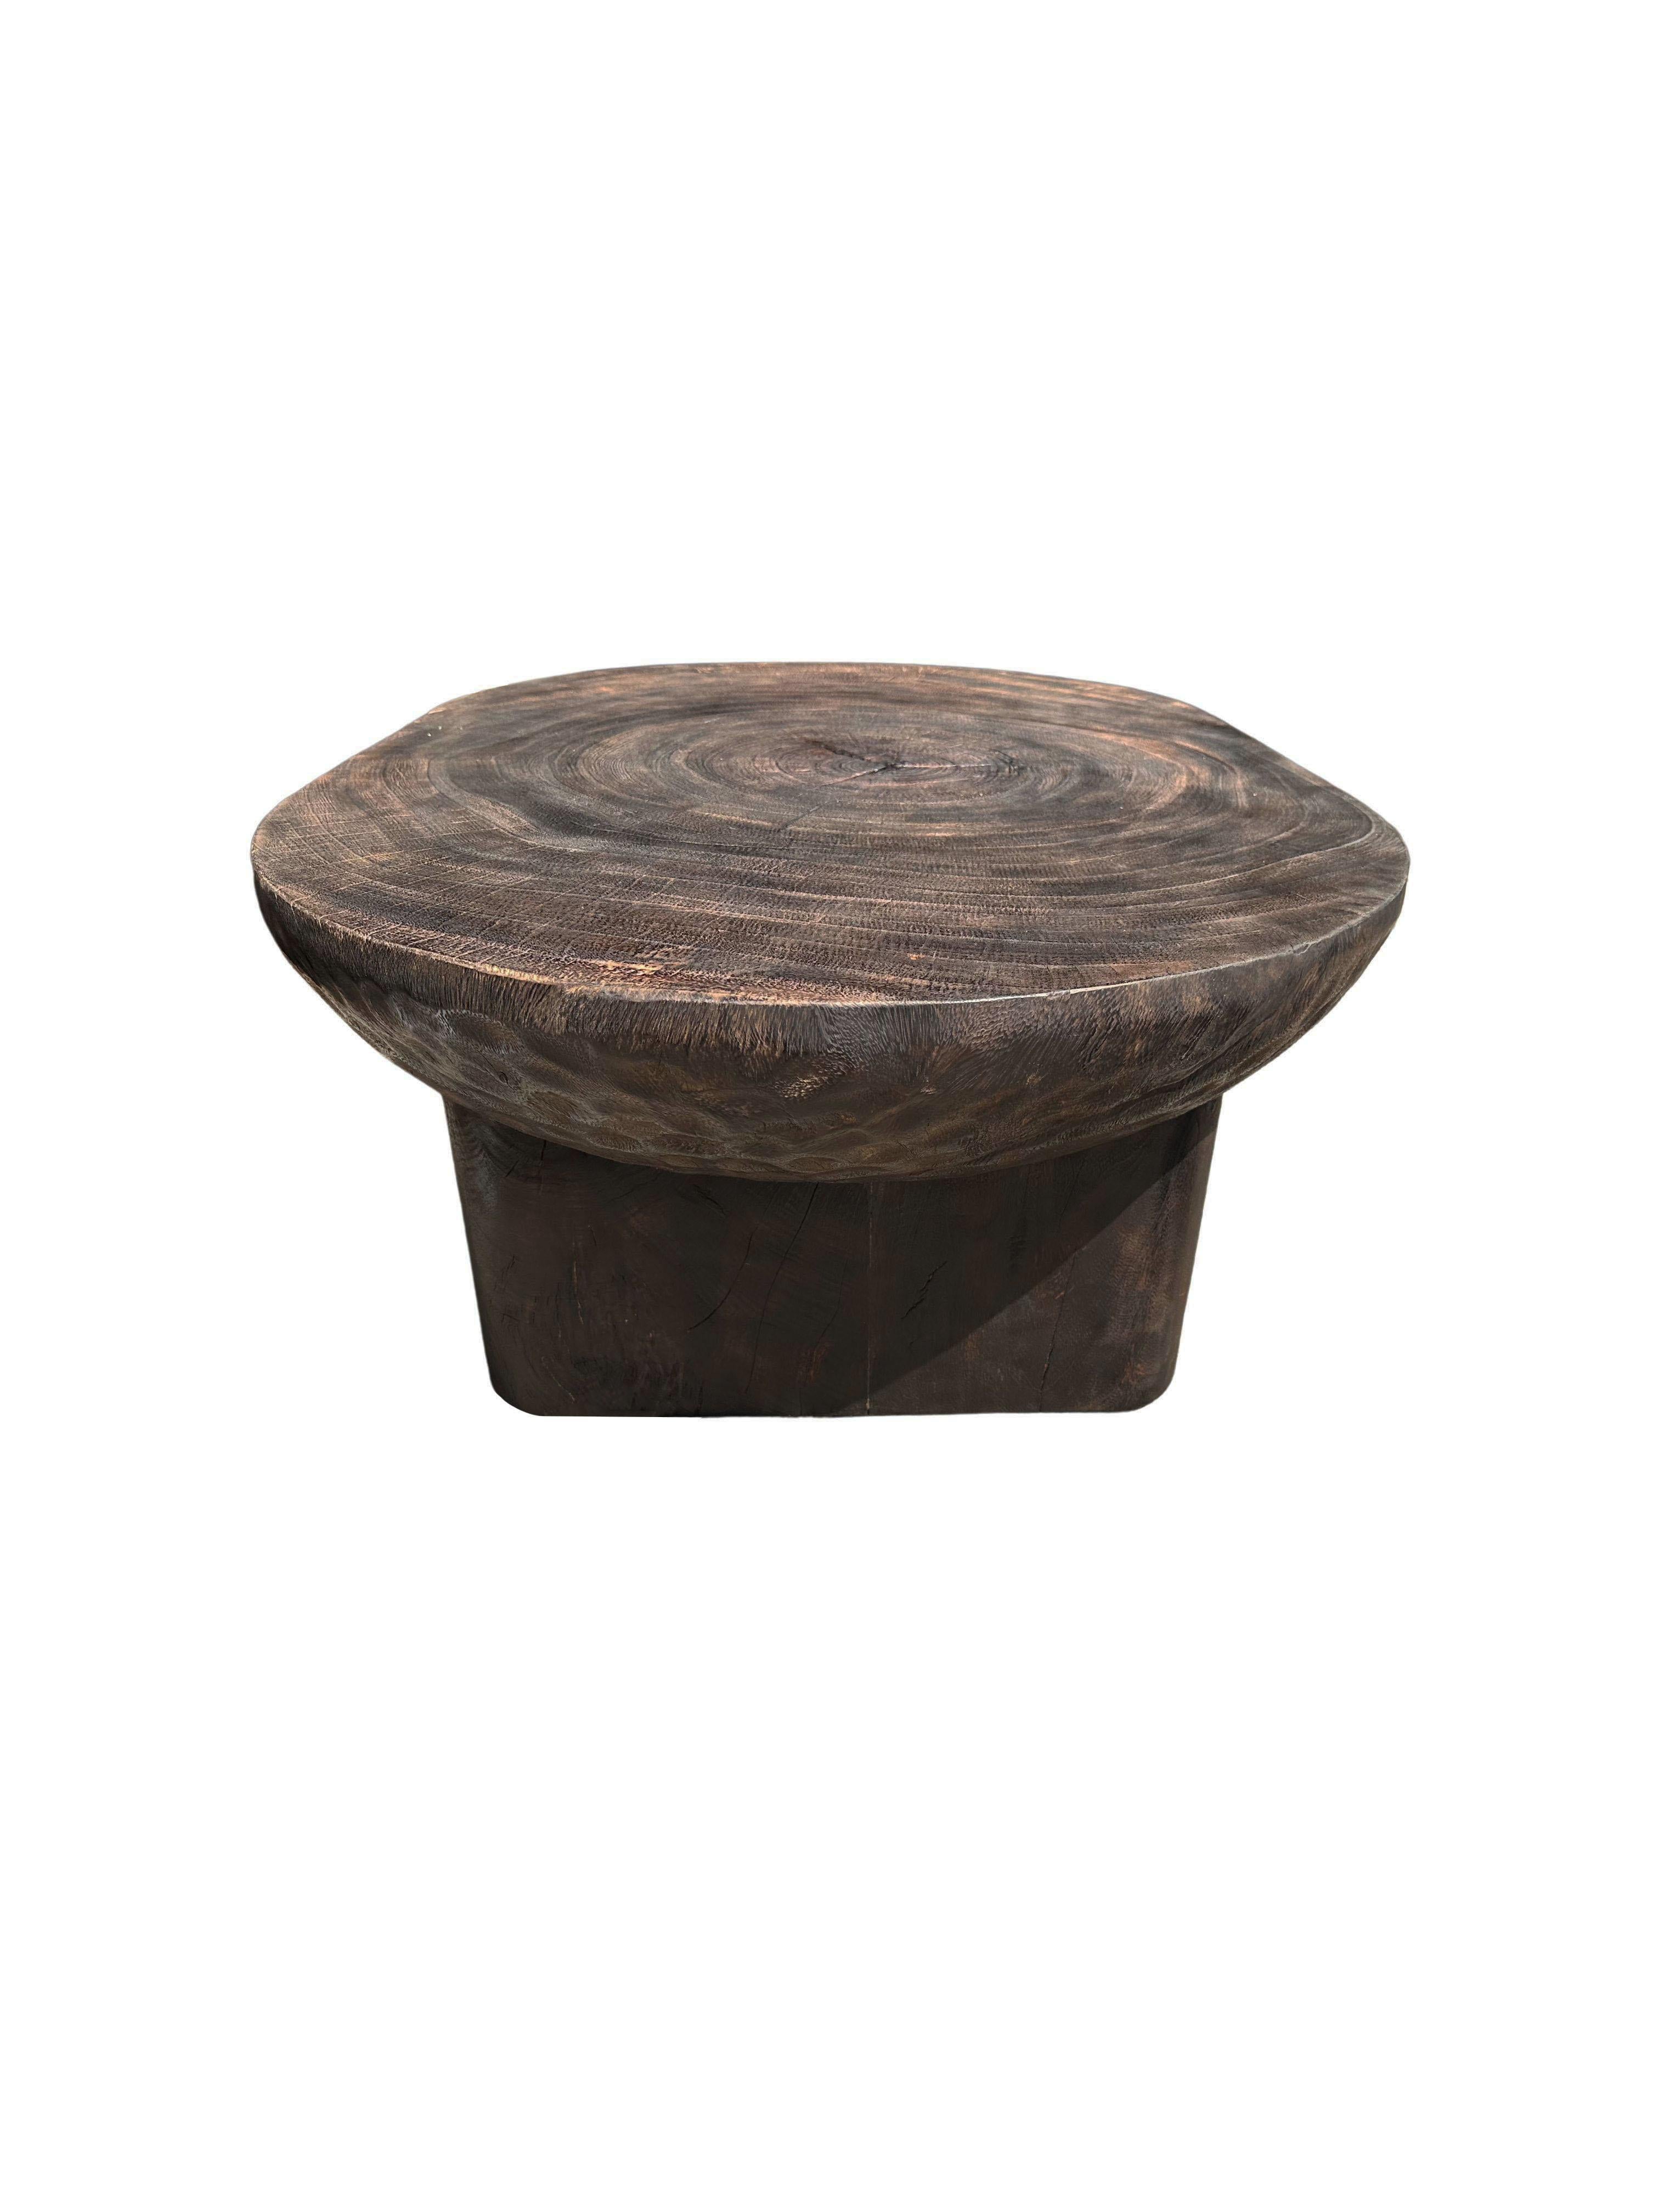 Hand-Crafted Suar Wood Table Hand-Hewn Detailing Espresso Finish, Modern Organic For Sale